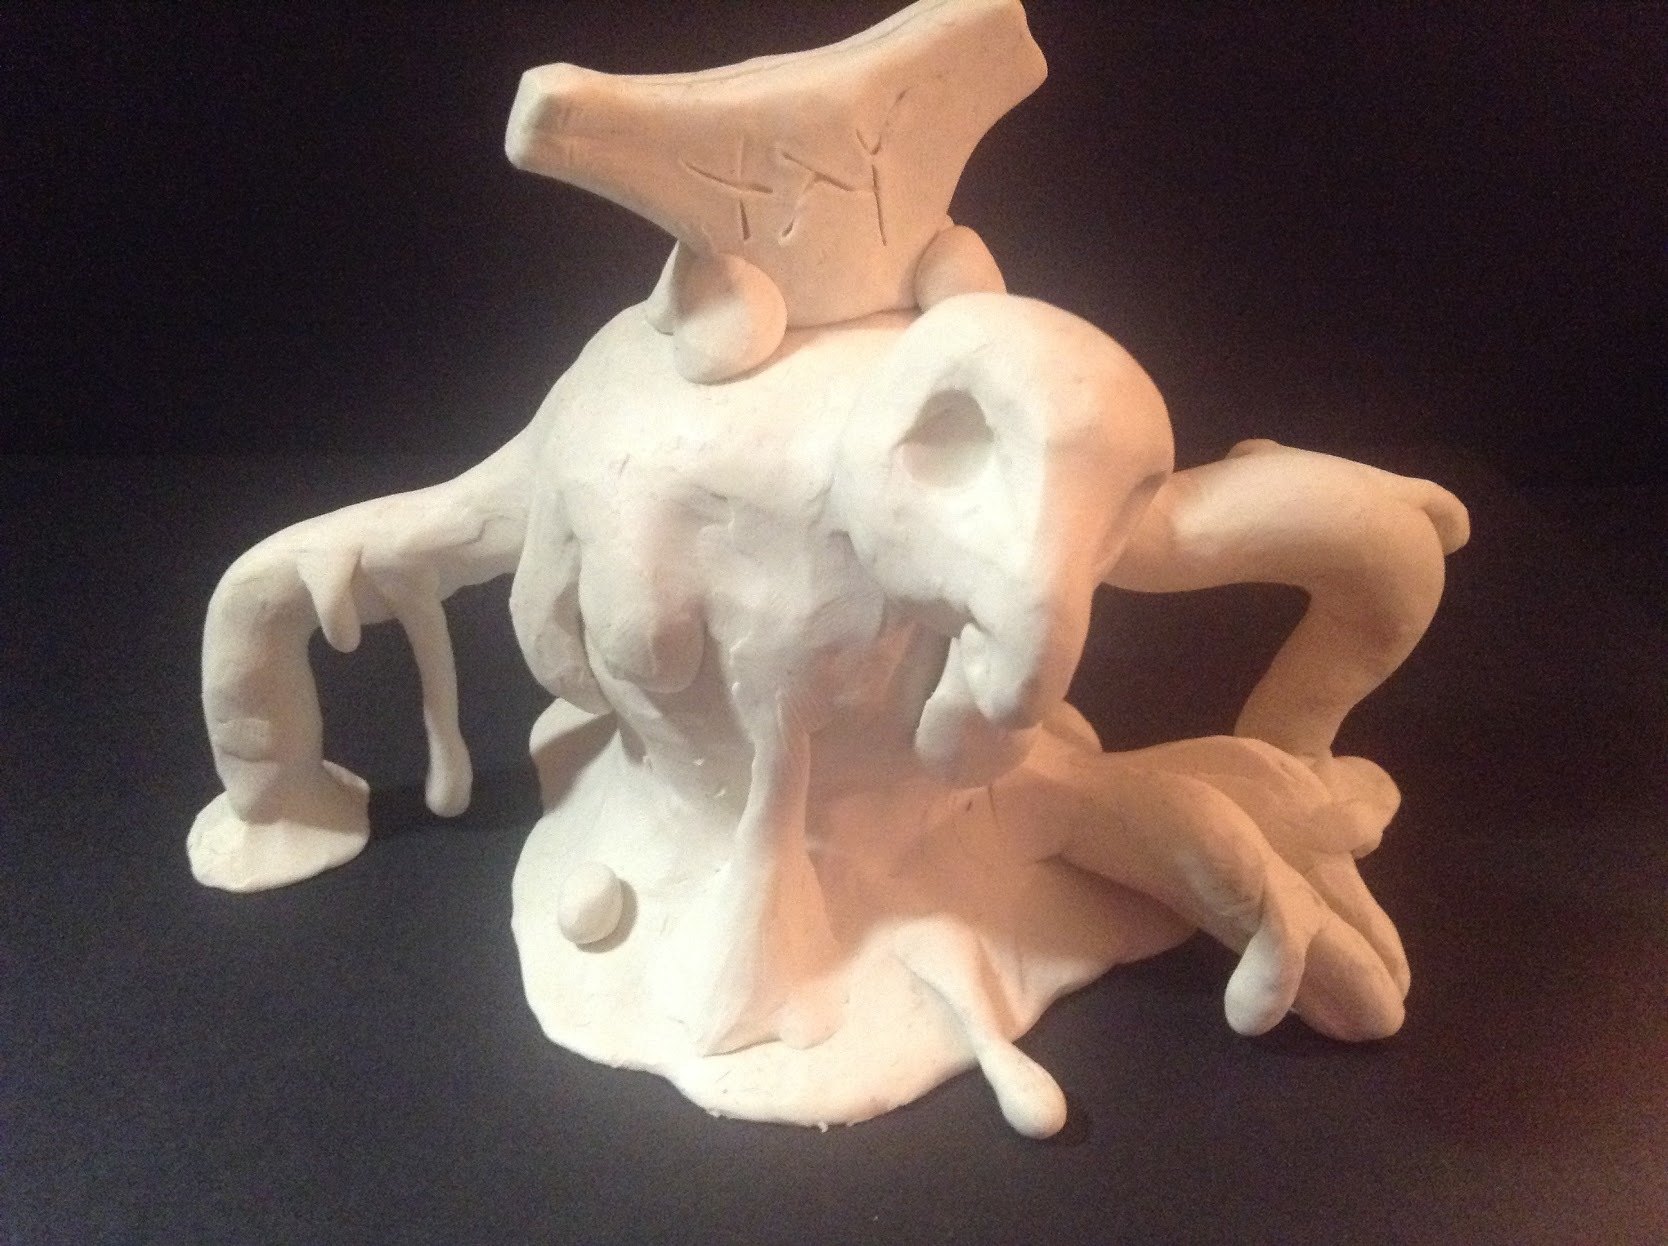 Clay sculpture with a variety of appendages